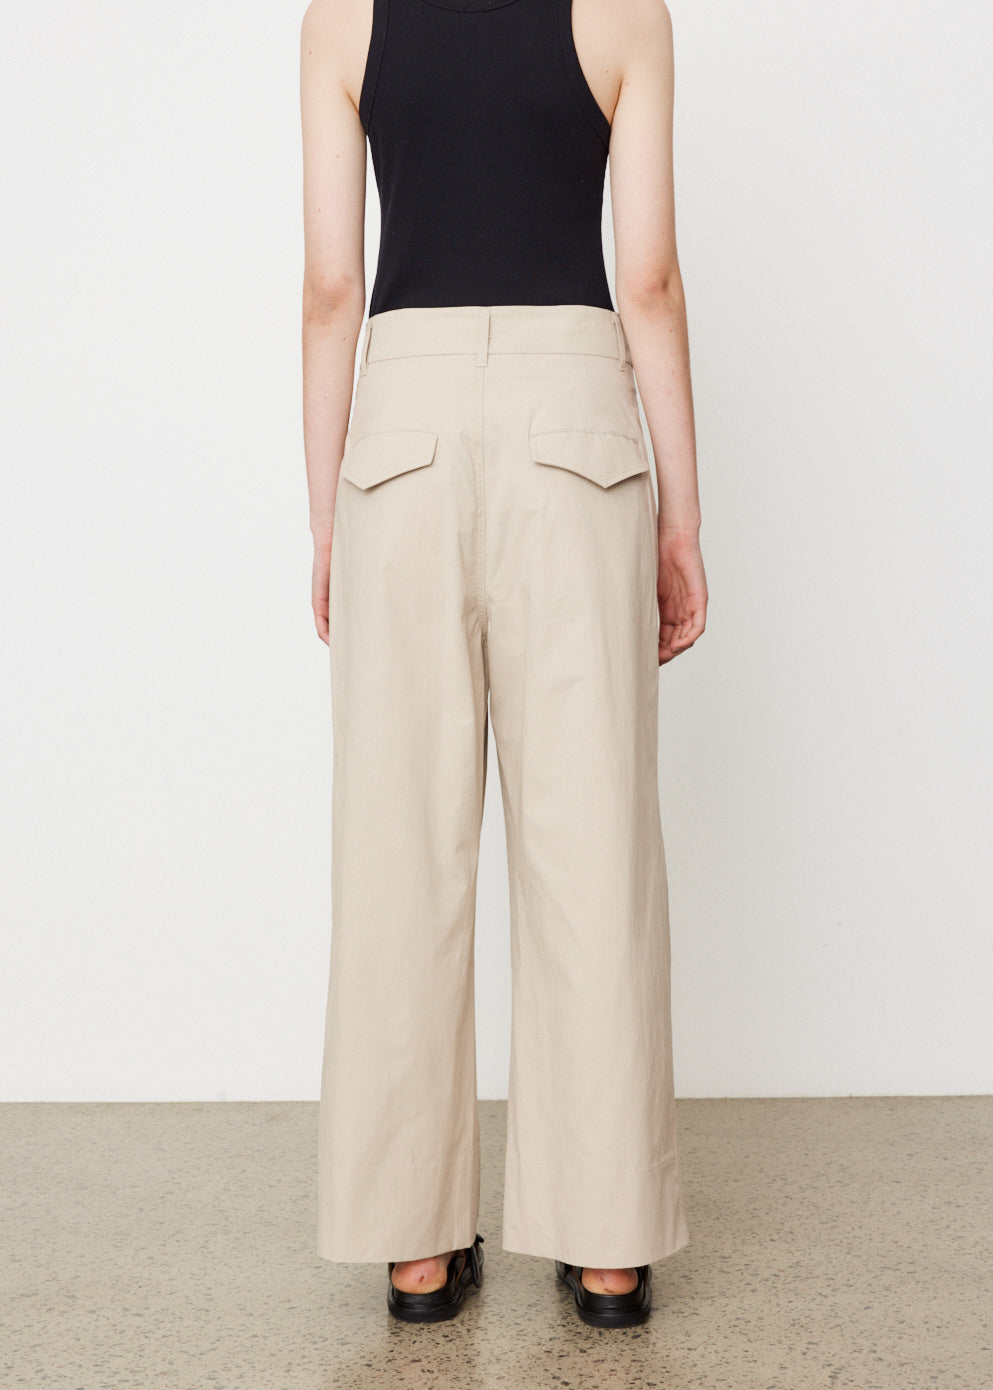 ASOS EDITION pleat front pants in ivory  ASOS